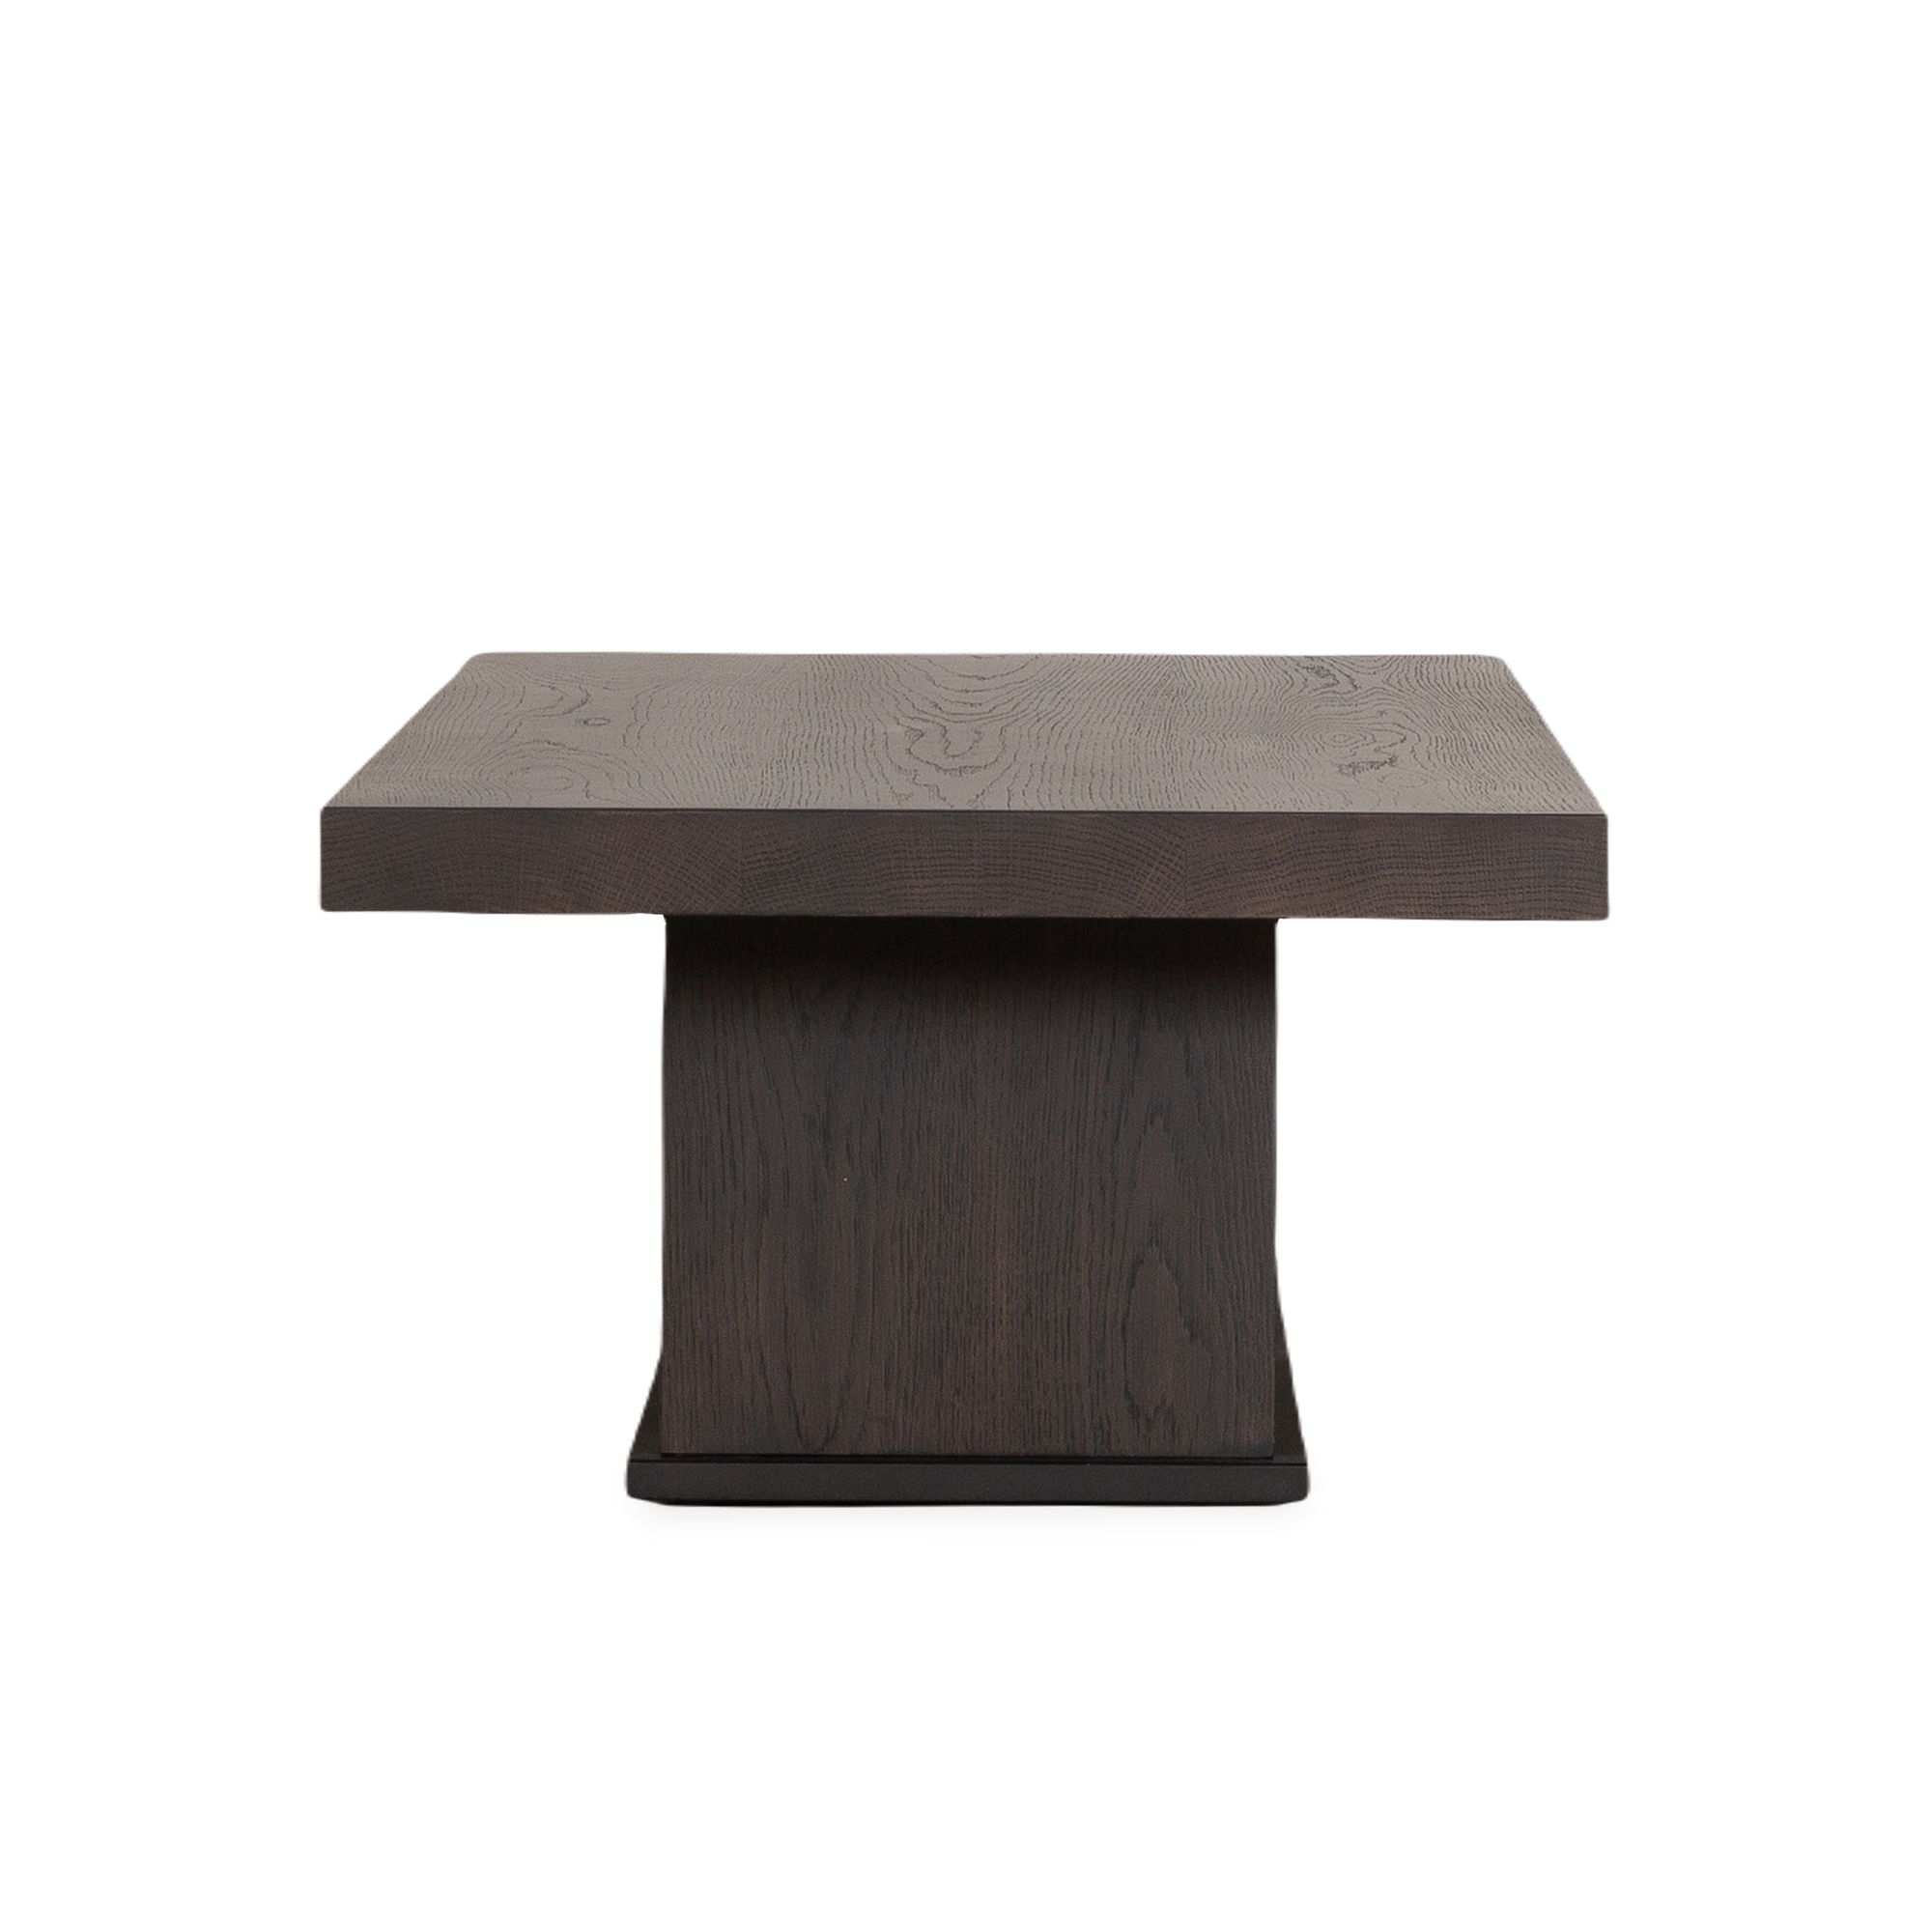 With bold, rectilinear lines and strong proportions, the Altar Rectangular Dining Table is a celebration of the timeless beauty of pure geometry.